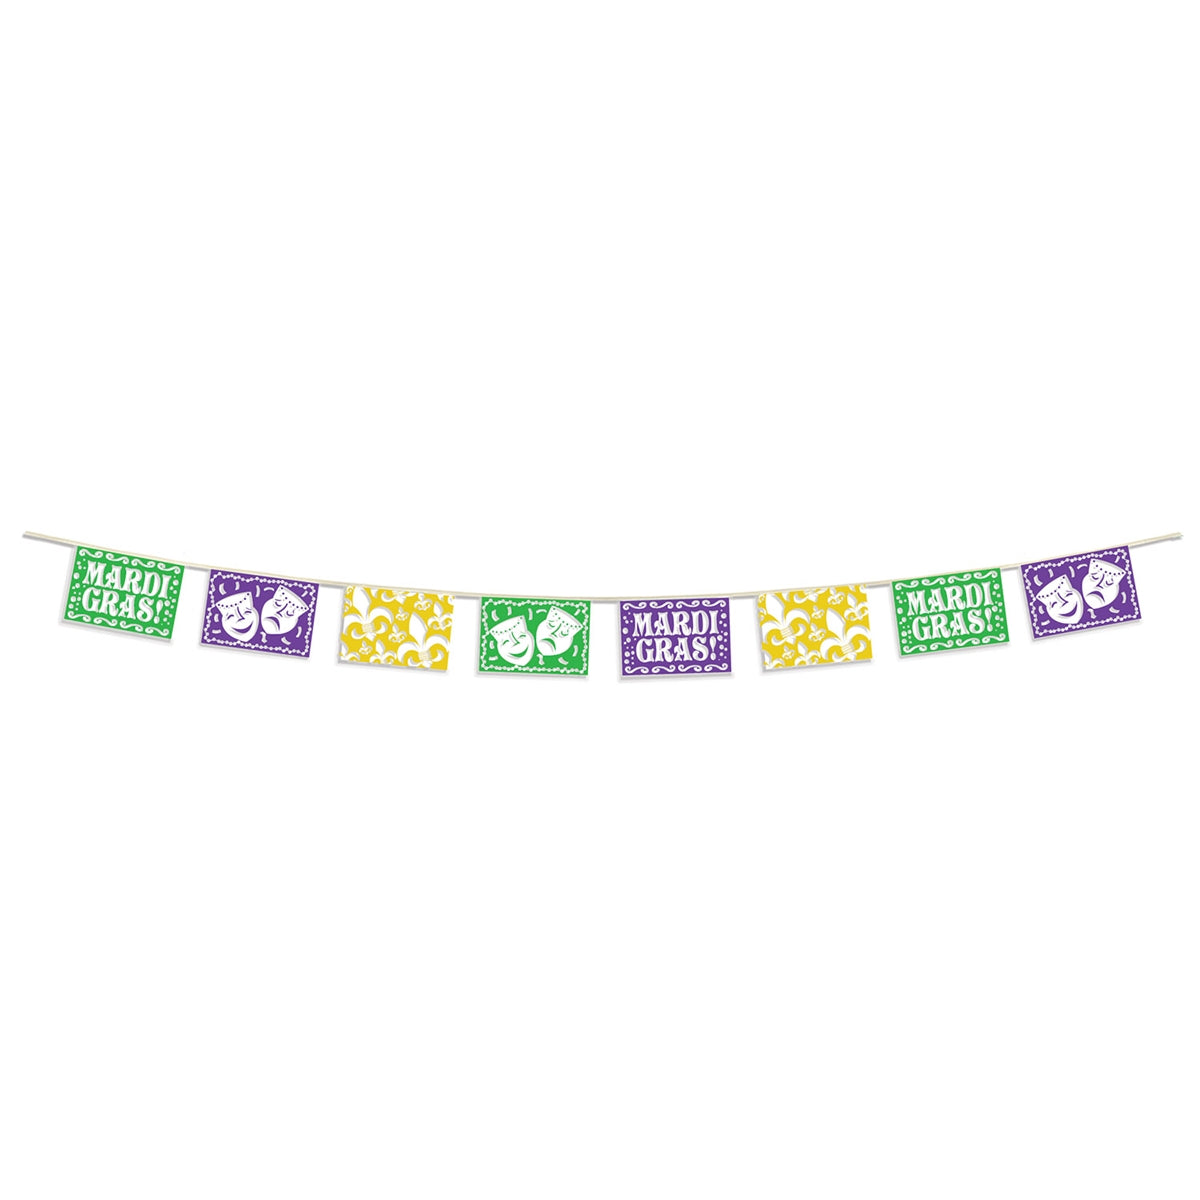 Mardi Gras Picado Style Pennant Banner - 12'x 8" | 1 Count